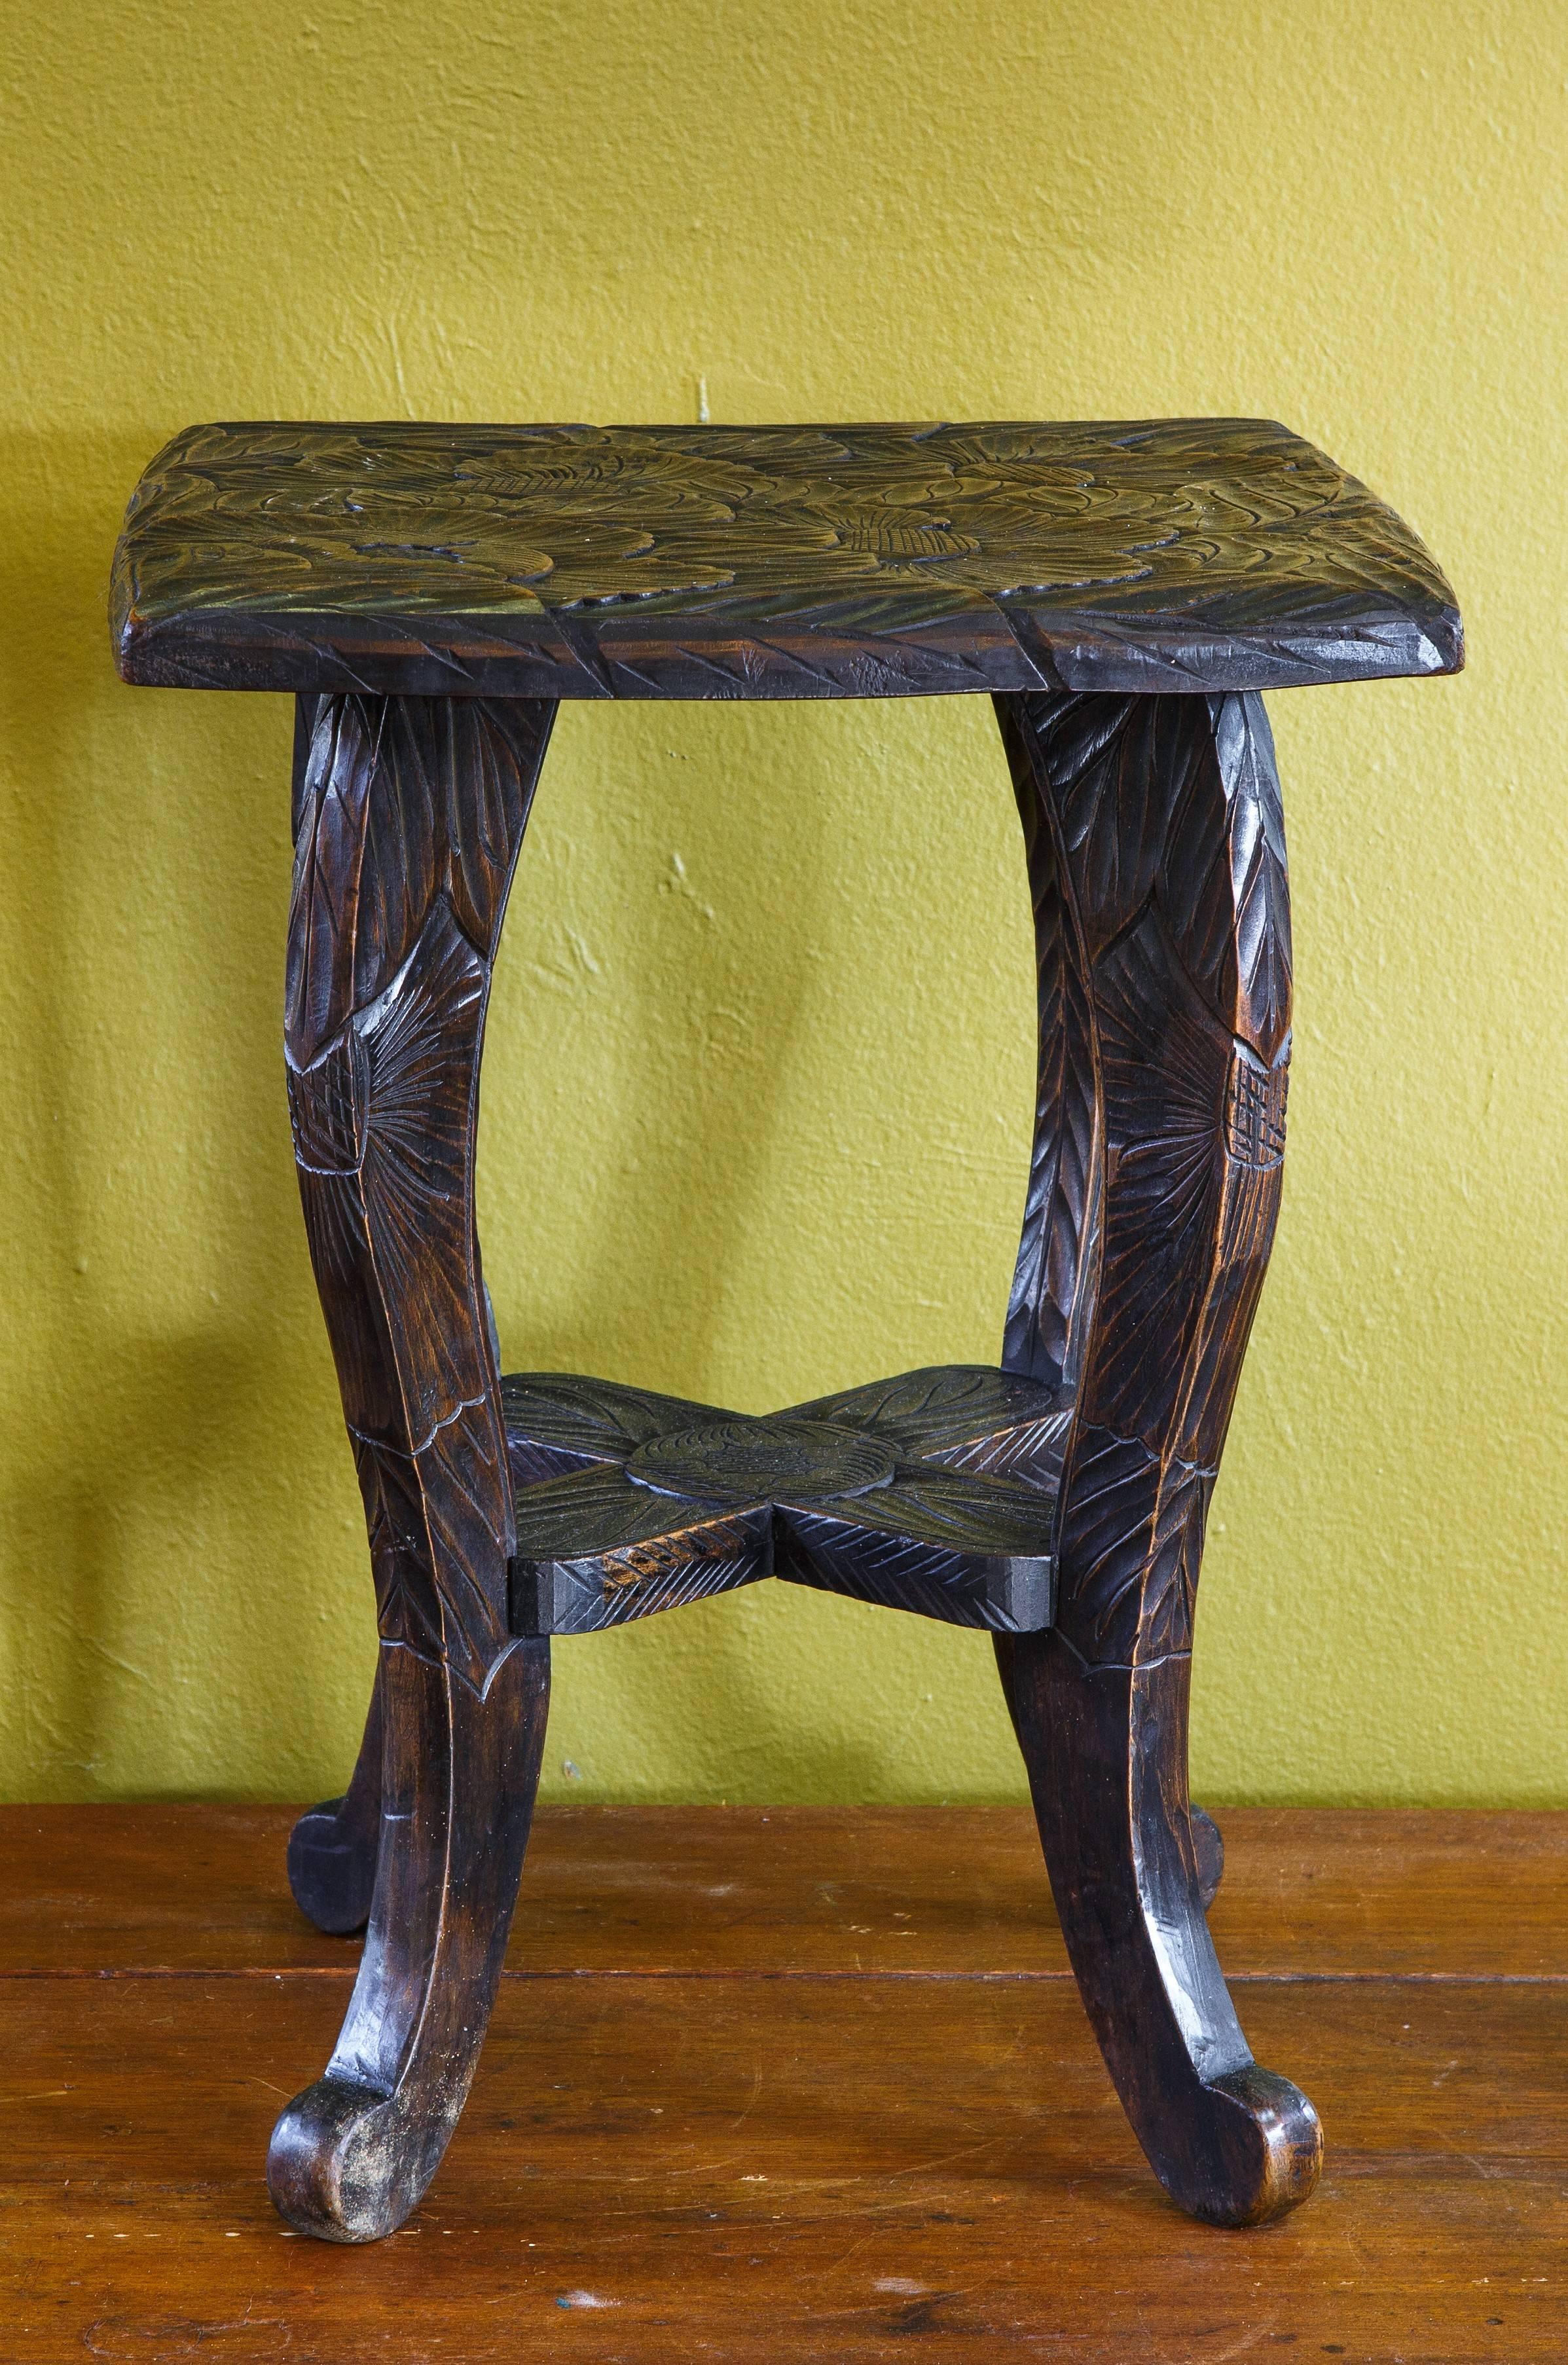 Wonderful, hand carved floral stool/table. An exuberant stylized flower and leaf pattern covers the top of the table. A simpler corresponding
pattern continues down the legs. Beautiful dark hued wood.